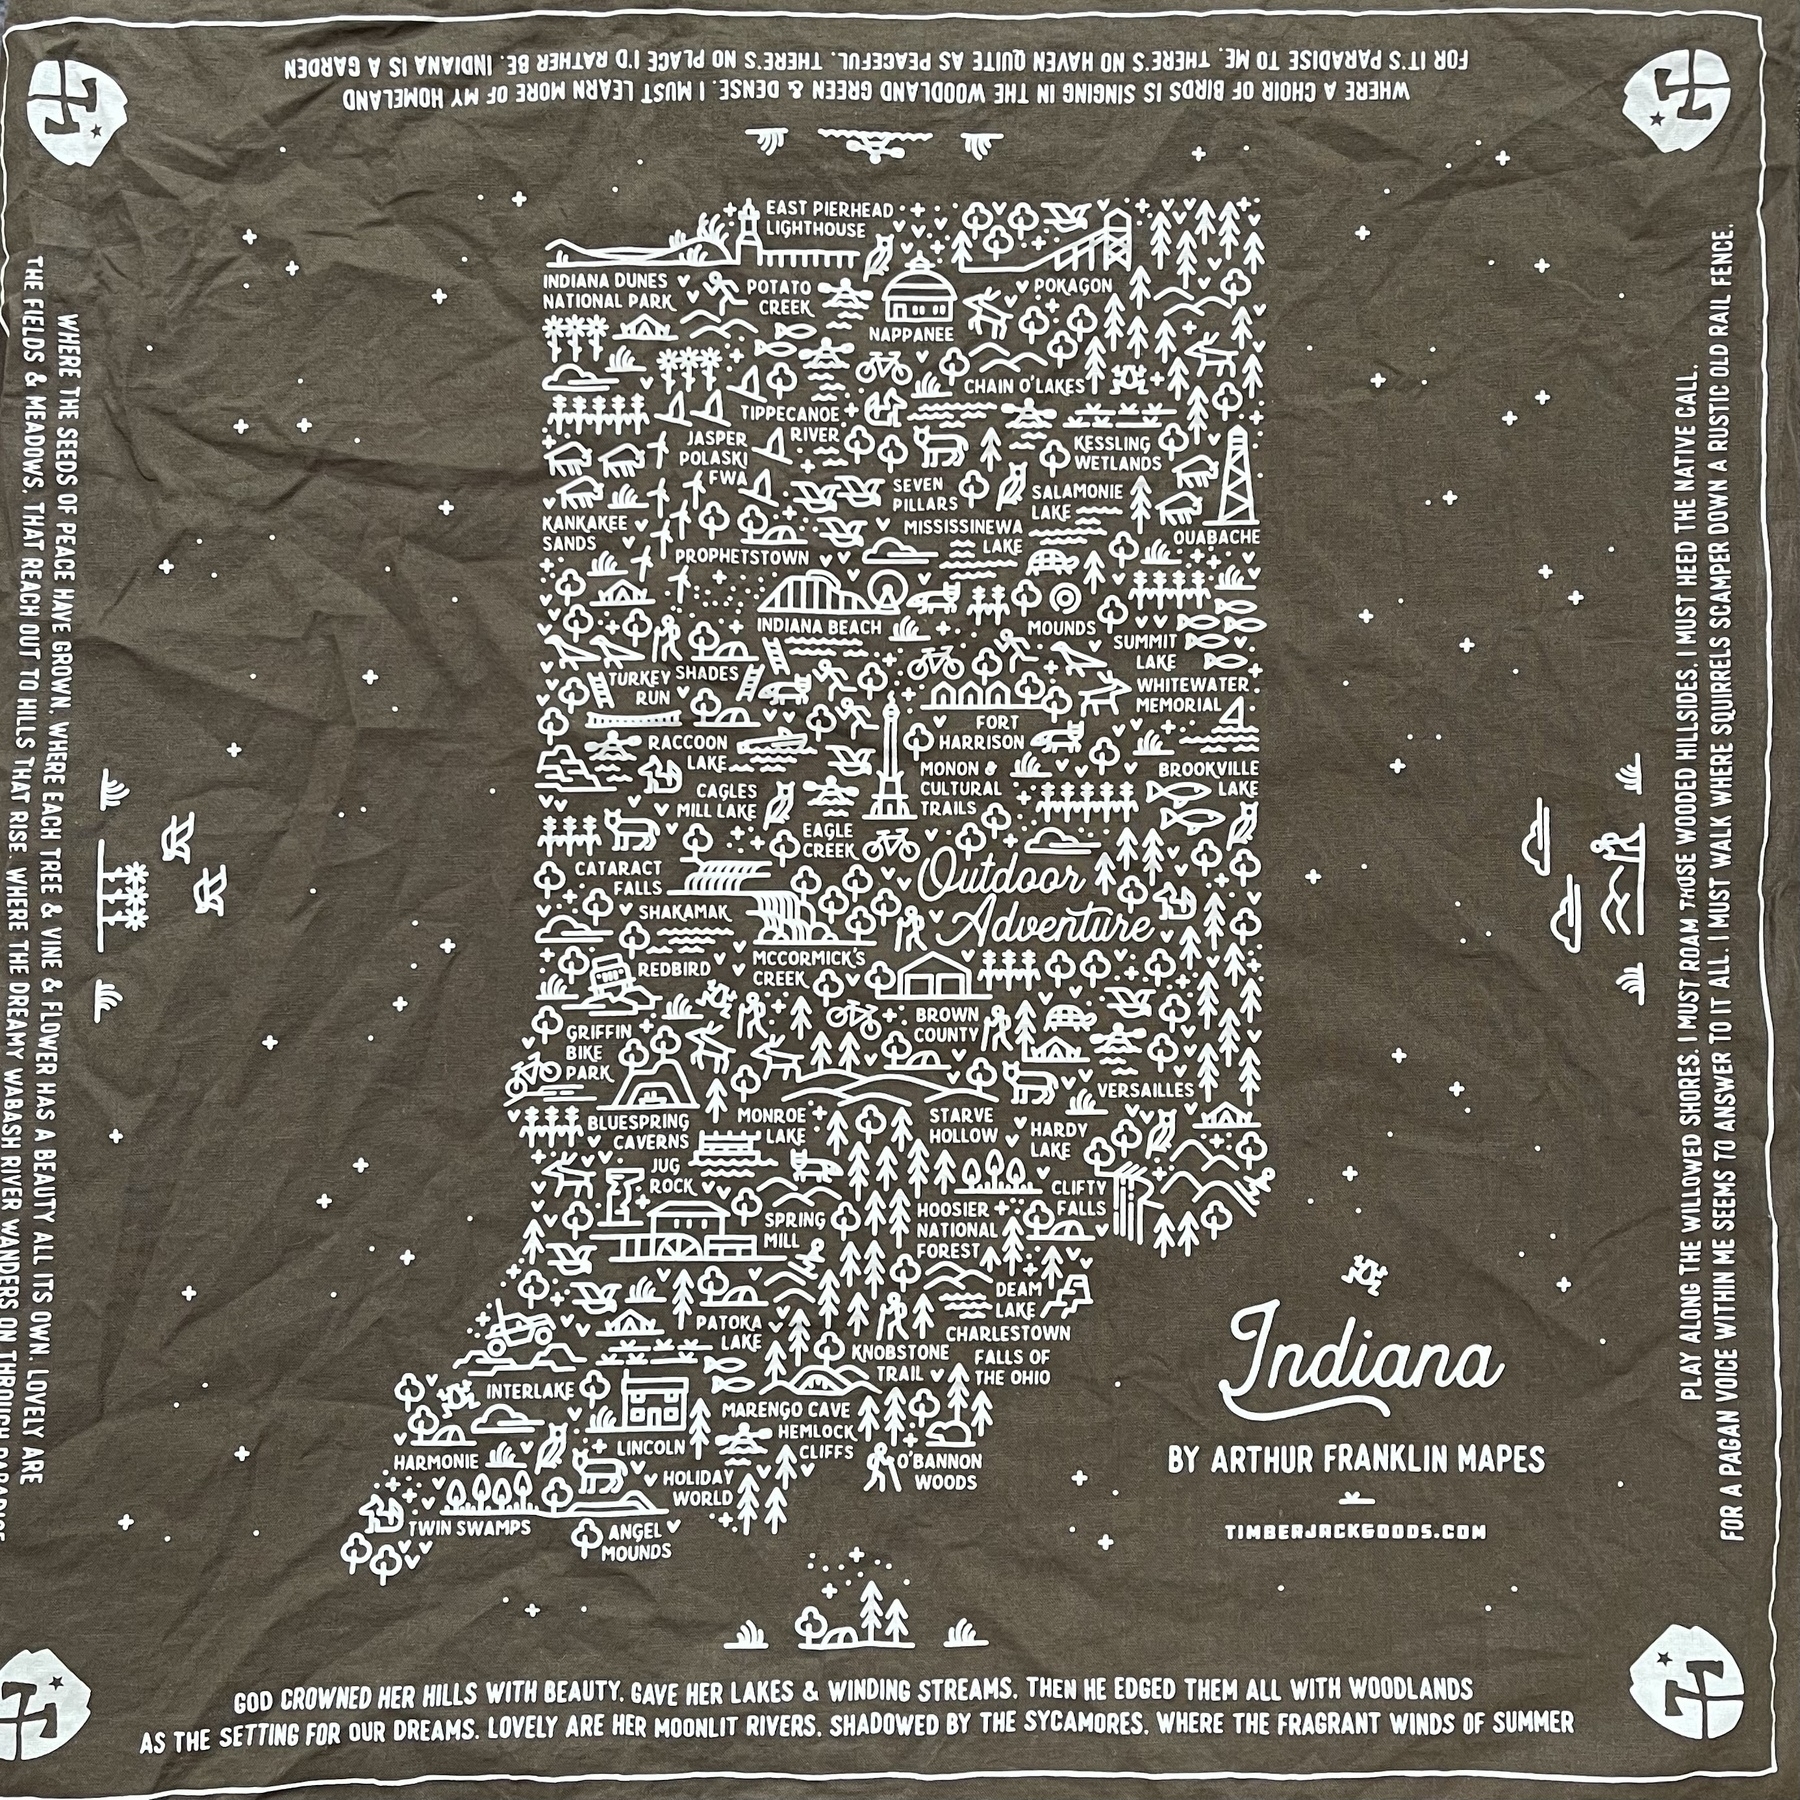 A handkerchief showing a map of Indiana made up of park and wilderness names 